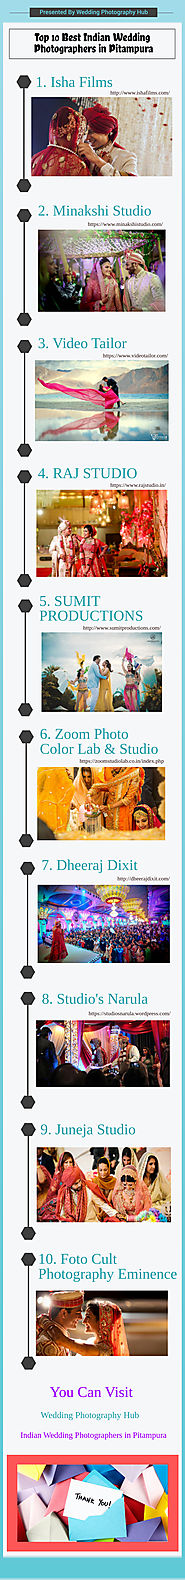 Top 10 Best Indian Wedding Photographers In Pitamp Infographic Template